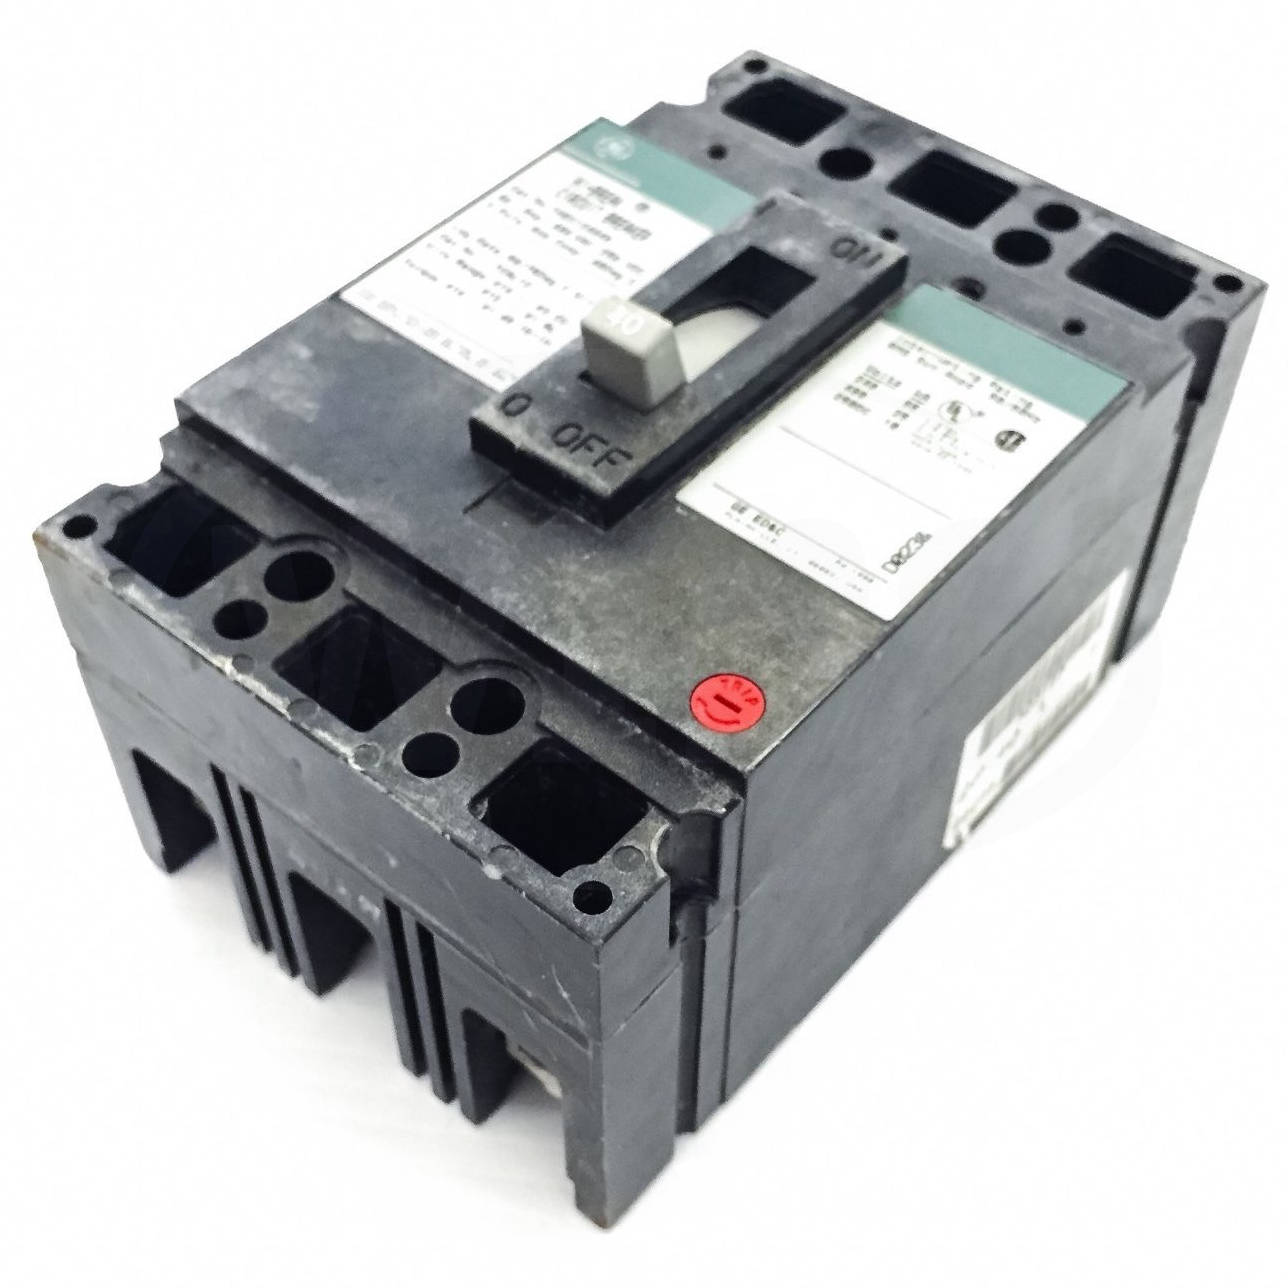 THED124040 General Electric (GE) Circuit Breaker, 40 Amp, 2 Pole